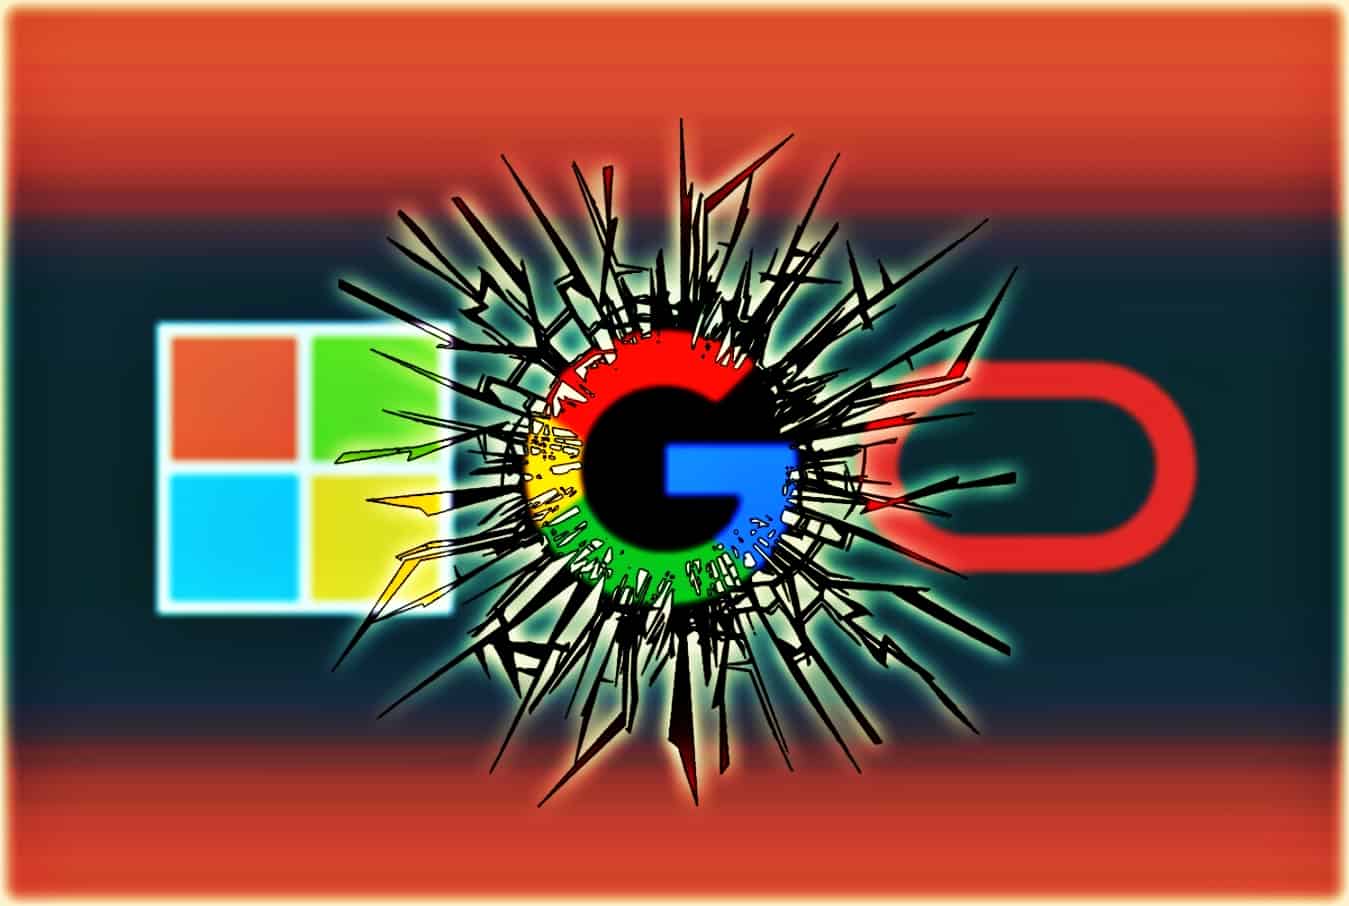 Google, Microsoft and Oracle generated most vulnerabilities in 2021